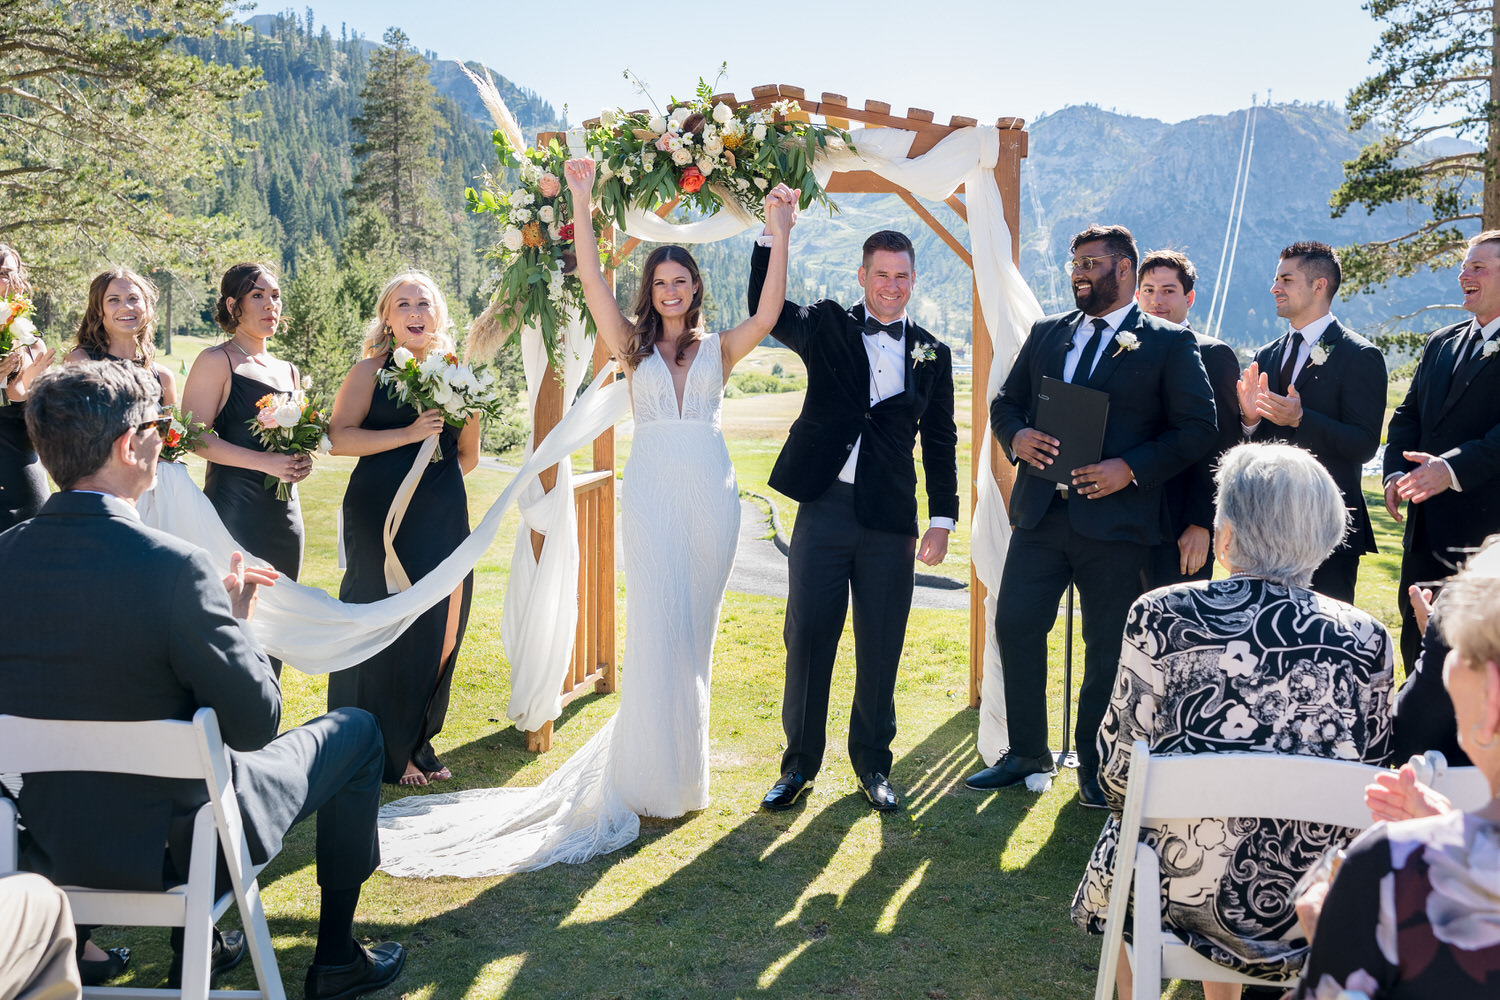 A celebratory moment for the bride and groom as they are pronounced married at Everline Resort & Spa in Olympic Valley.